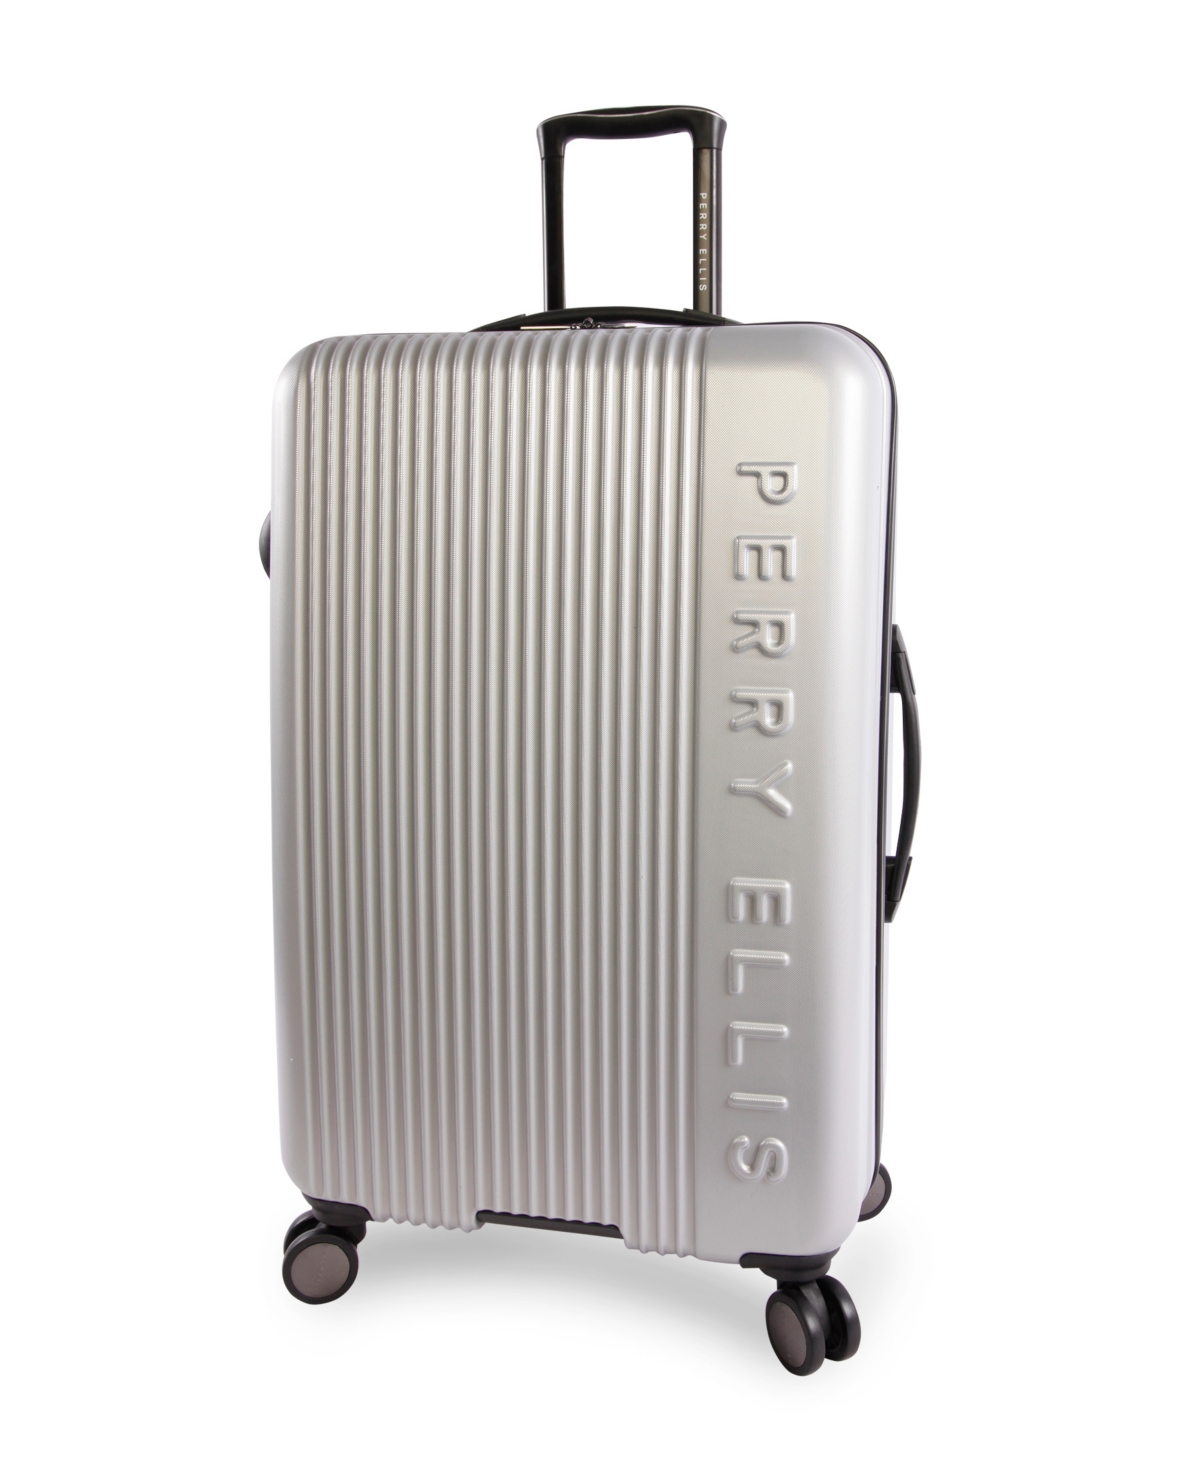 Forte 29" Spinner Luggage - Silver